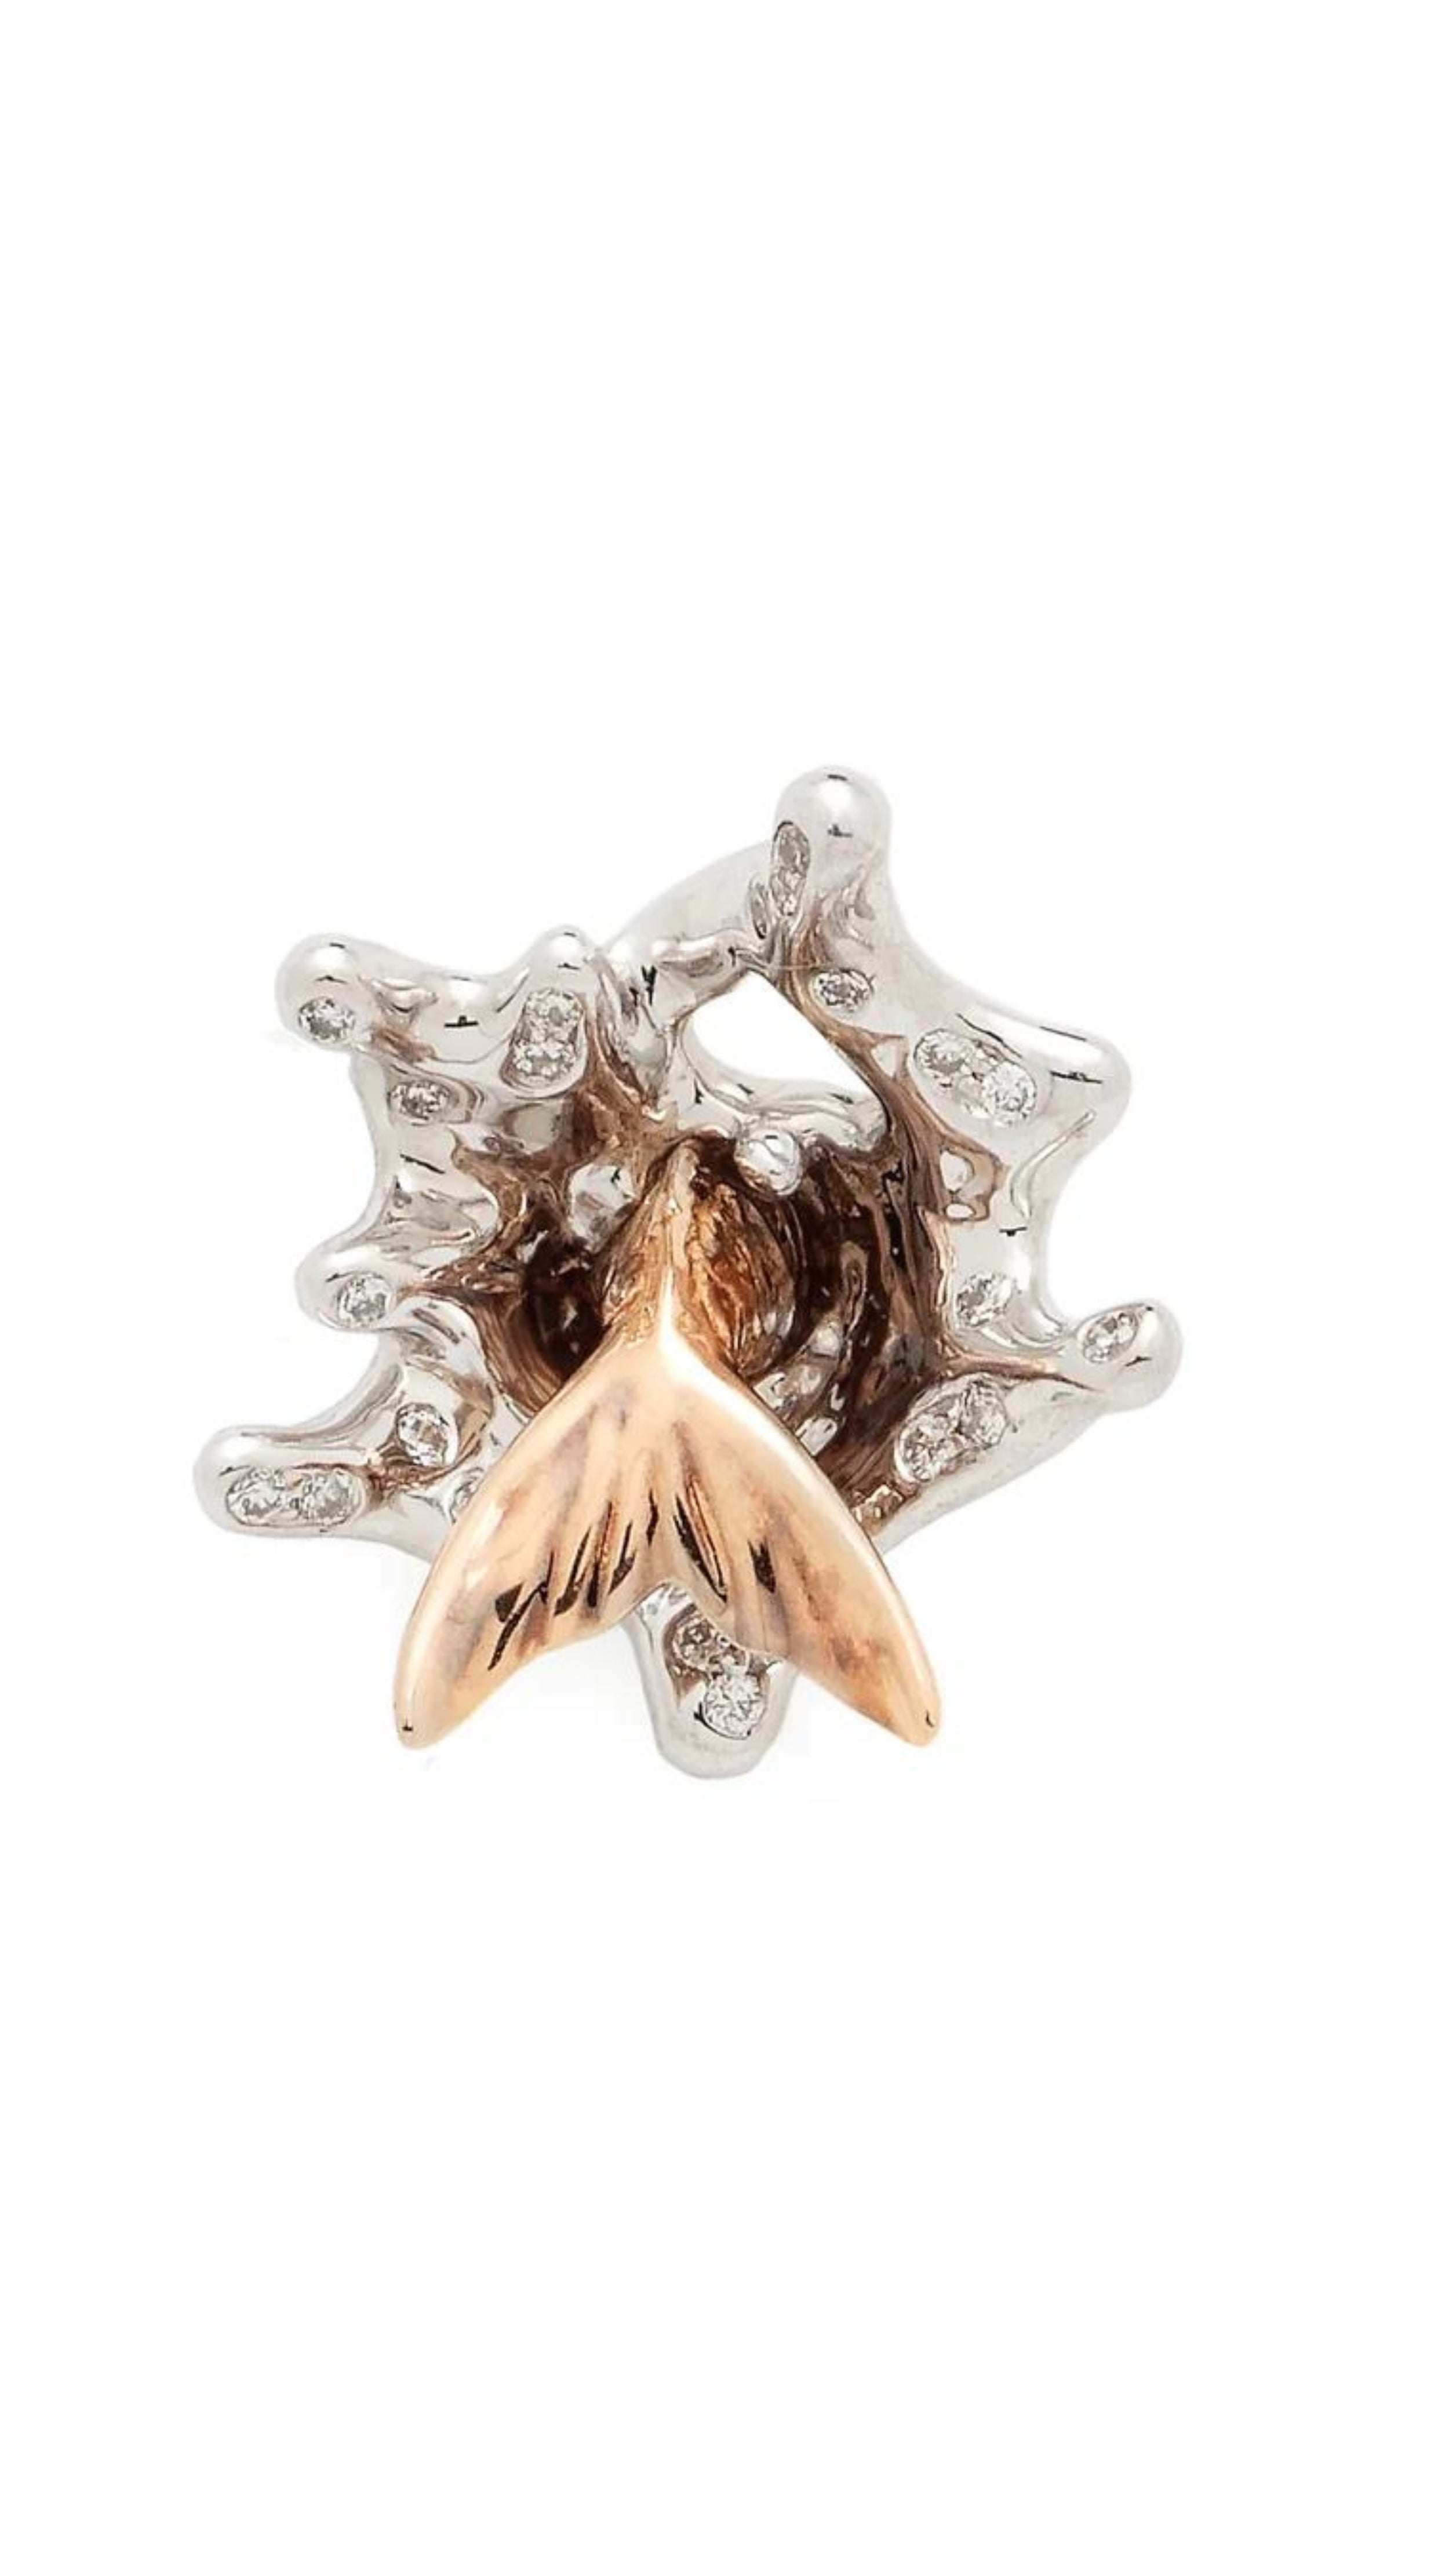 Bibi van der Velden Splash Stud. This sculptural earring is crafted from 18k white and rose gold with tiny diamond accents that evoke the sea&#39;s foamy waves. Shown from the front.